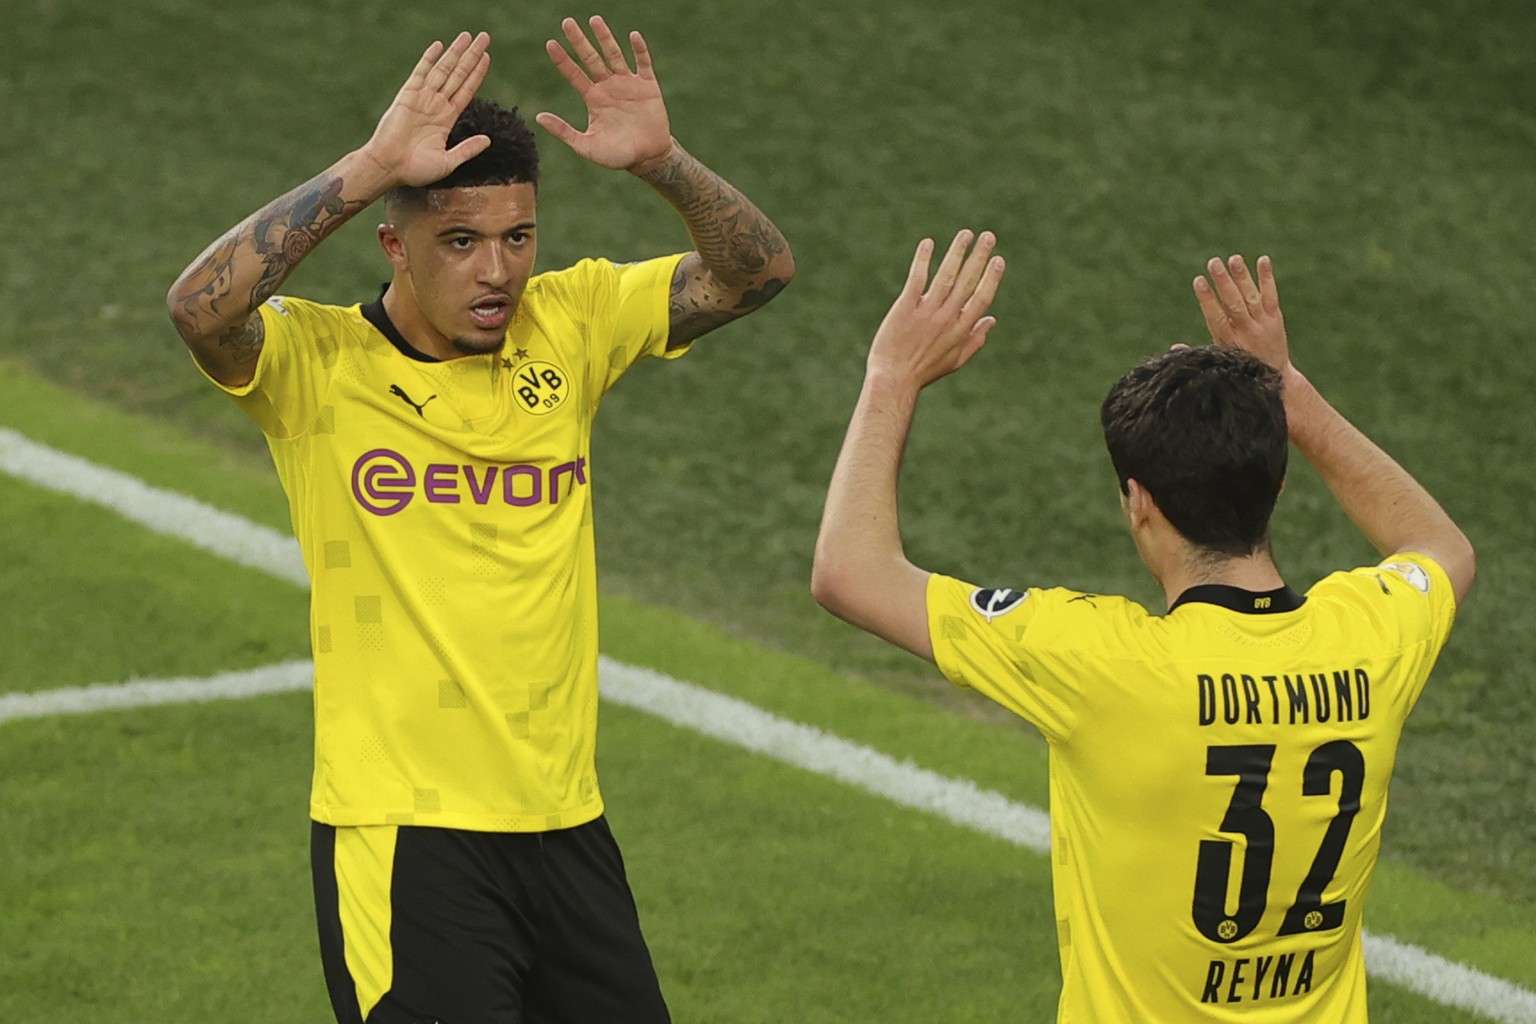 Dortmund&#039;s Giovanni Reyna celebrates after scoring his side&#039;s opening goal with Dortmund&#039;s Jadon Sancho during the German Soccer Cup semifinal match between Borussia Dortmund and Holste ...